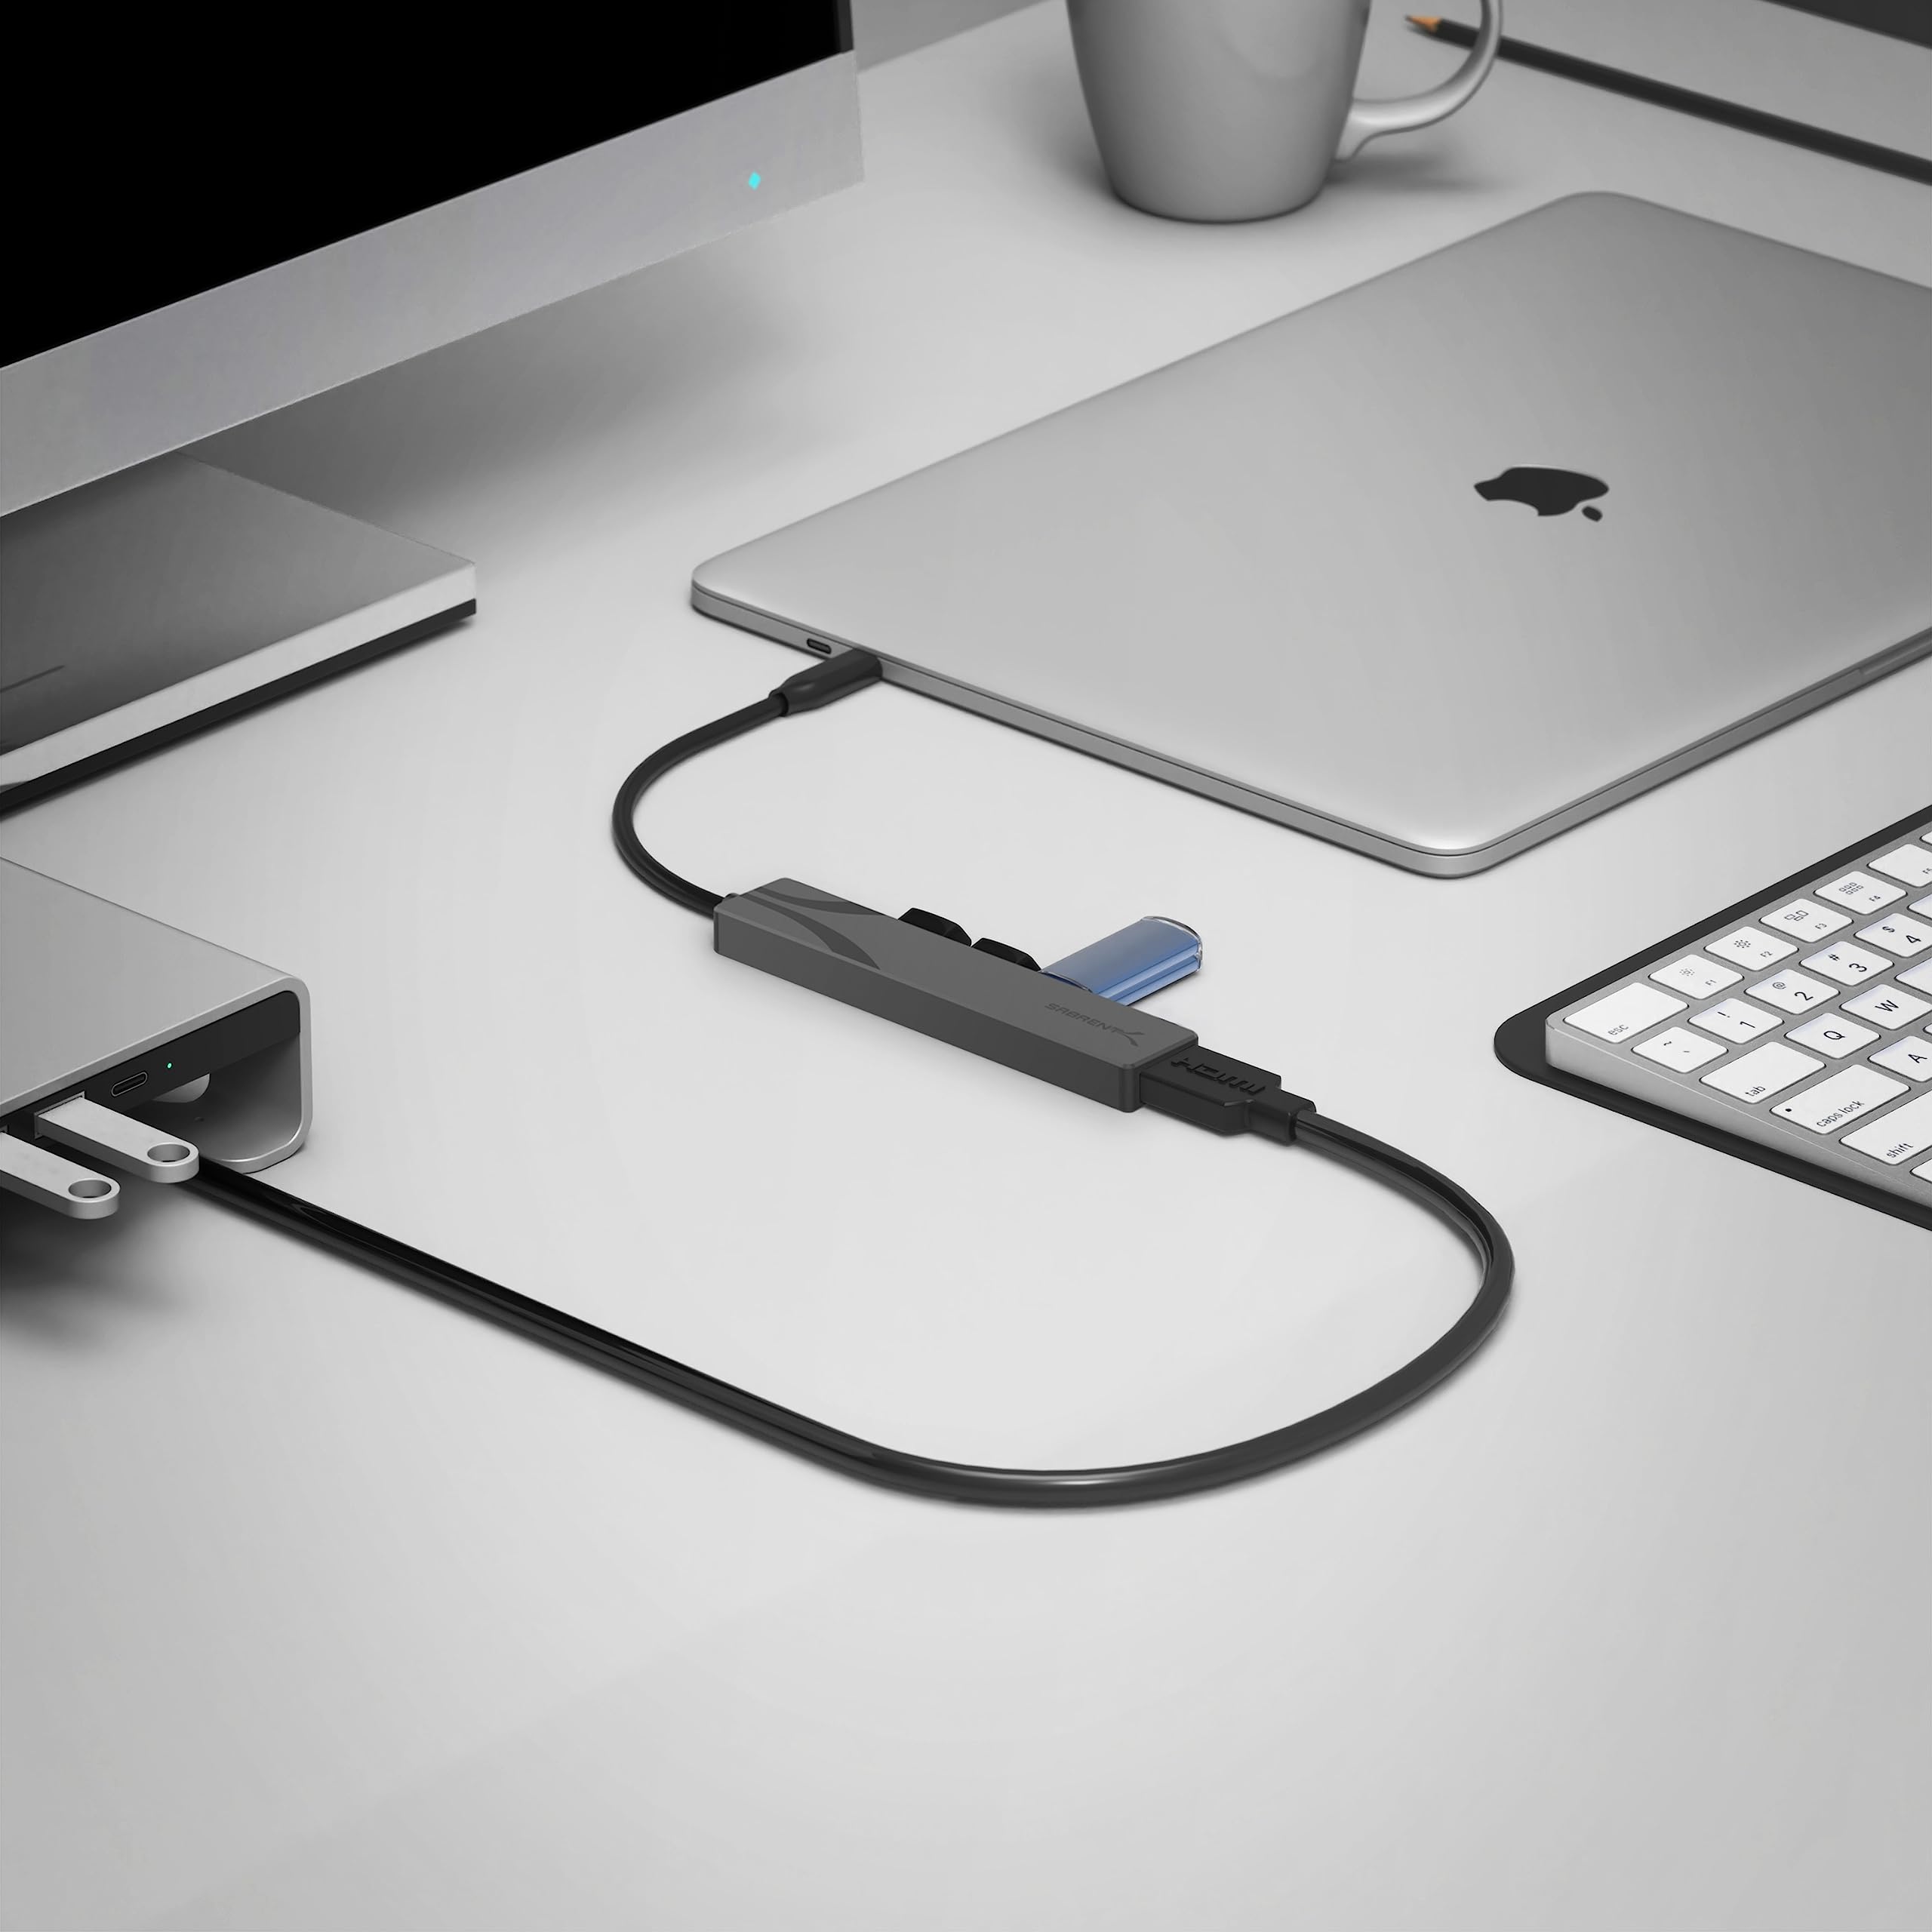 SABRENT Multi-Port USB-C Hub with Power Delivery and HDMI Out, 3 USB A Ports [HB-SHPU]